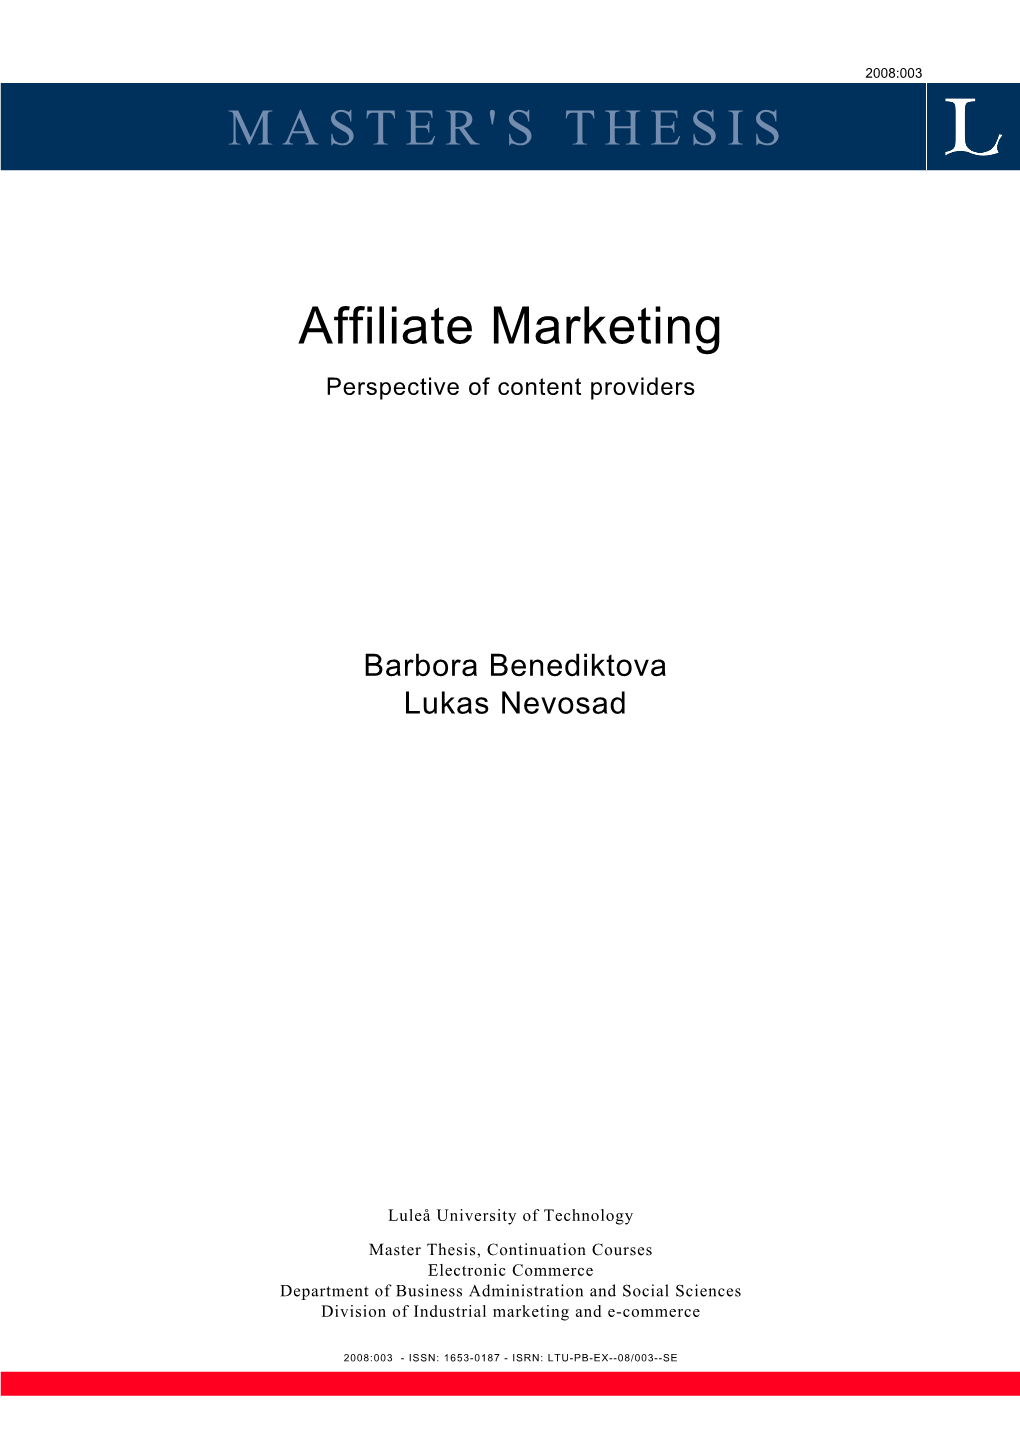 MASTER's THESIS Affiliate Marketing